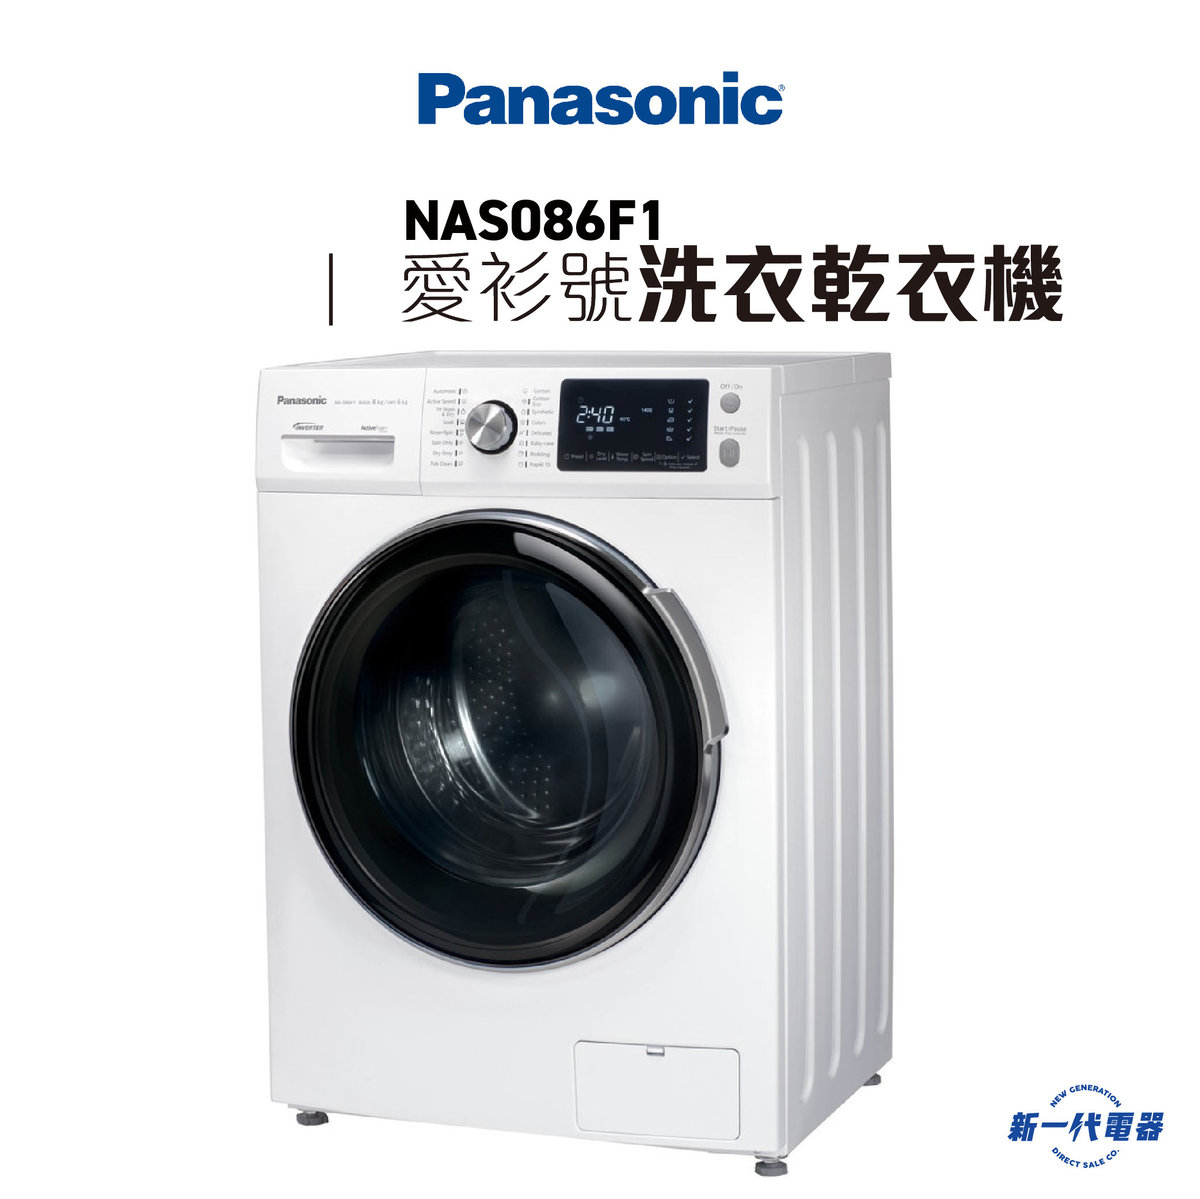 NAS086F1 -2in1 Washer Dryer (Washing capacity : 8kg, Drying capacity:6kg)  (NA-S086F1)